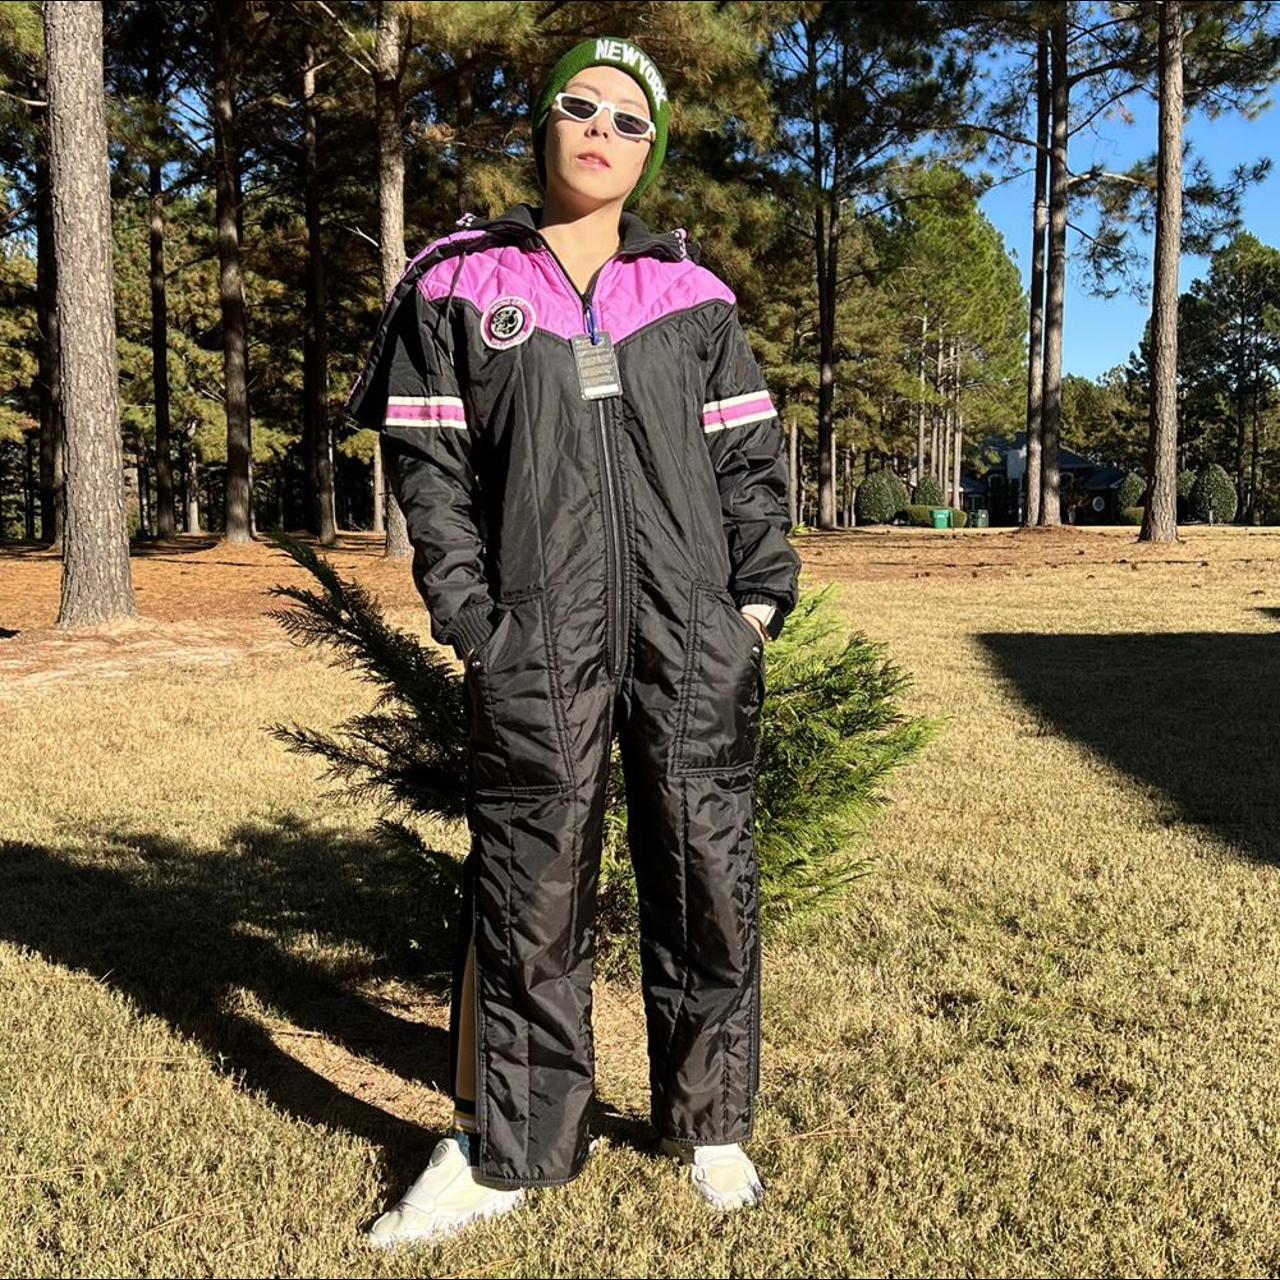 Product Image 1 - COZY CABIN SKI SUIT

🌈Fits like